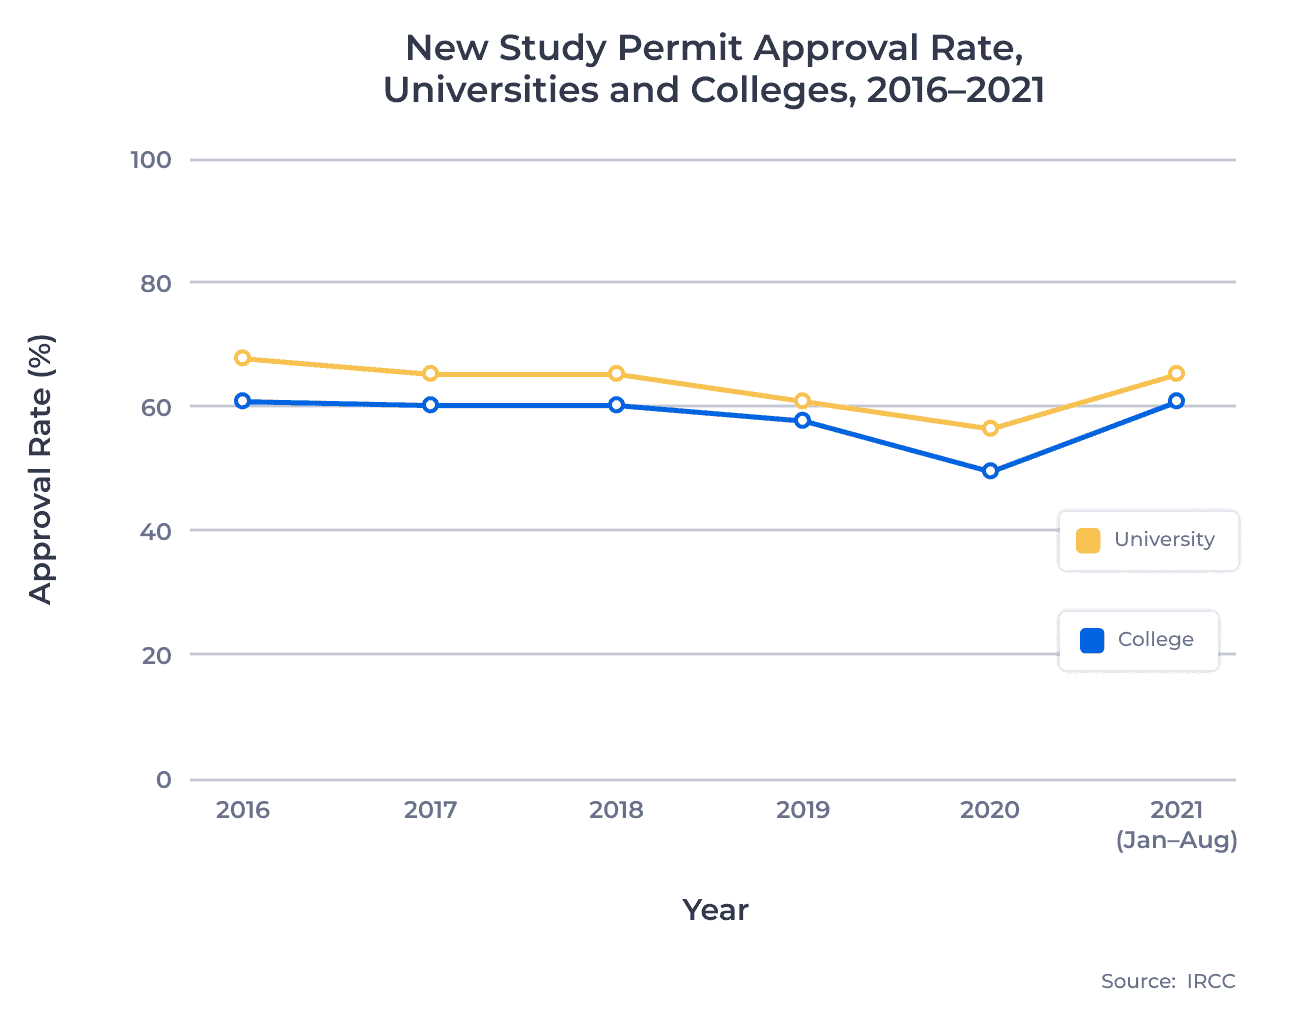 A line chart that track new study permit approval rates for Canadian universities and colleges from 2016 to 2021